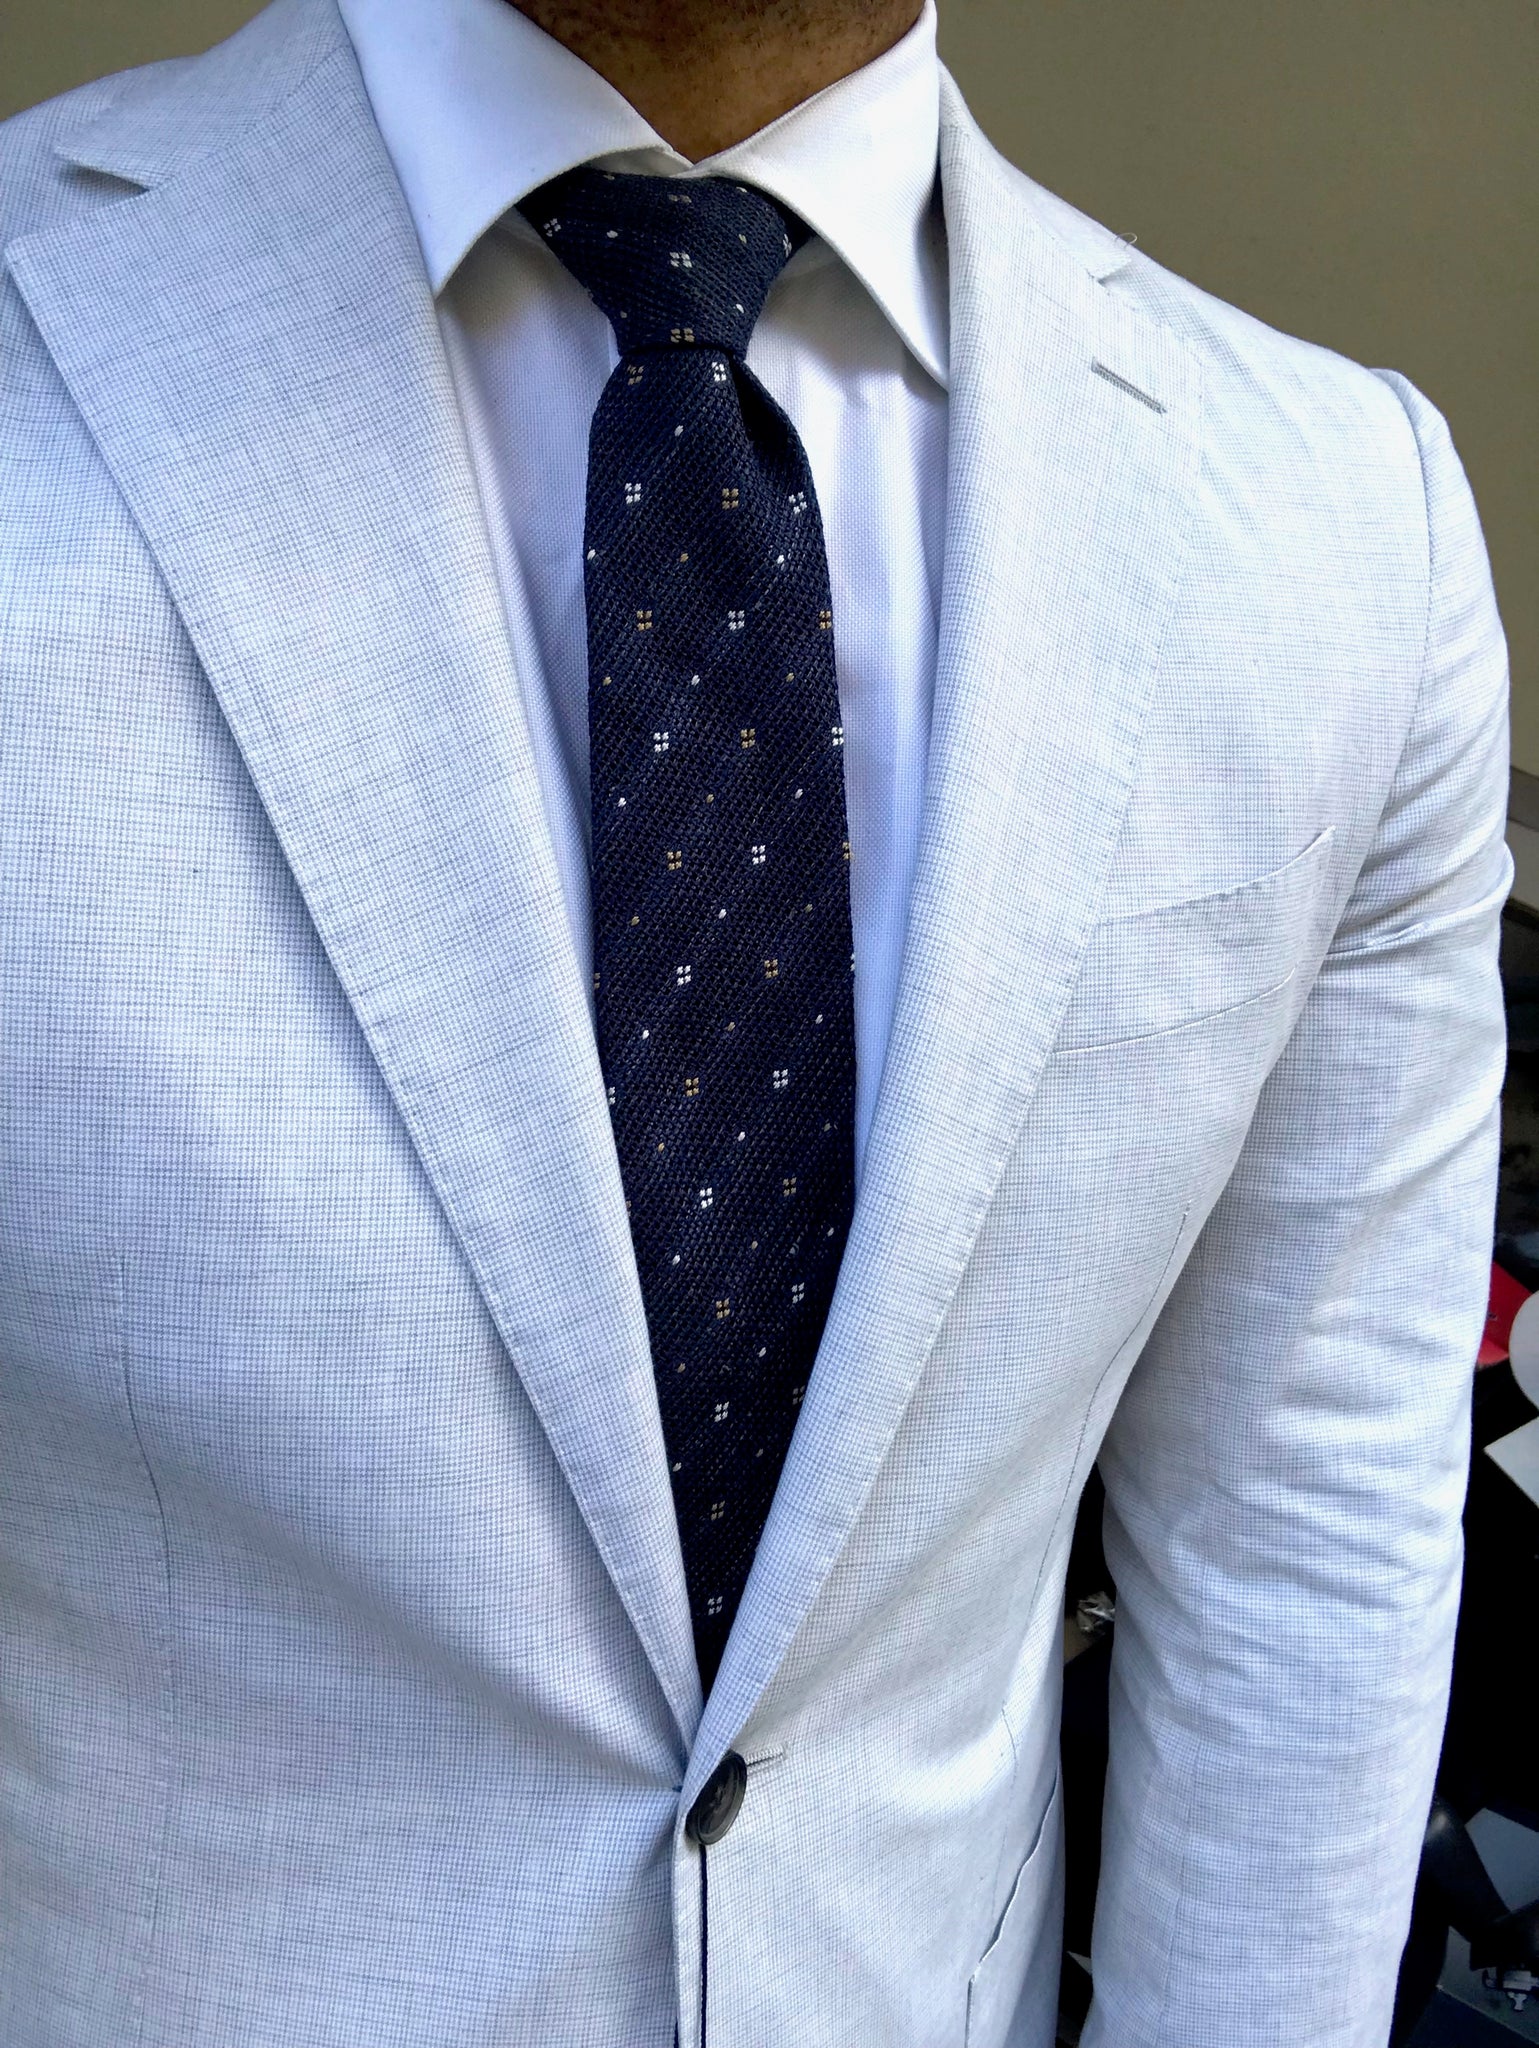 New With Tags SUITSUPPLY Havana Light Gray Houndstooth 100% Cotton Sui ...